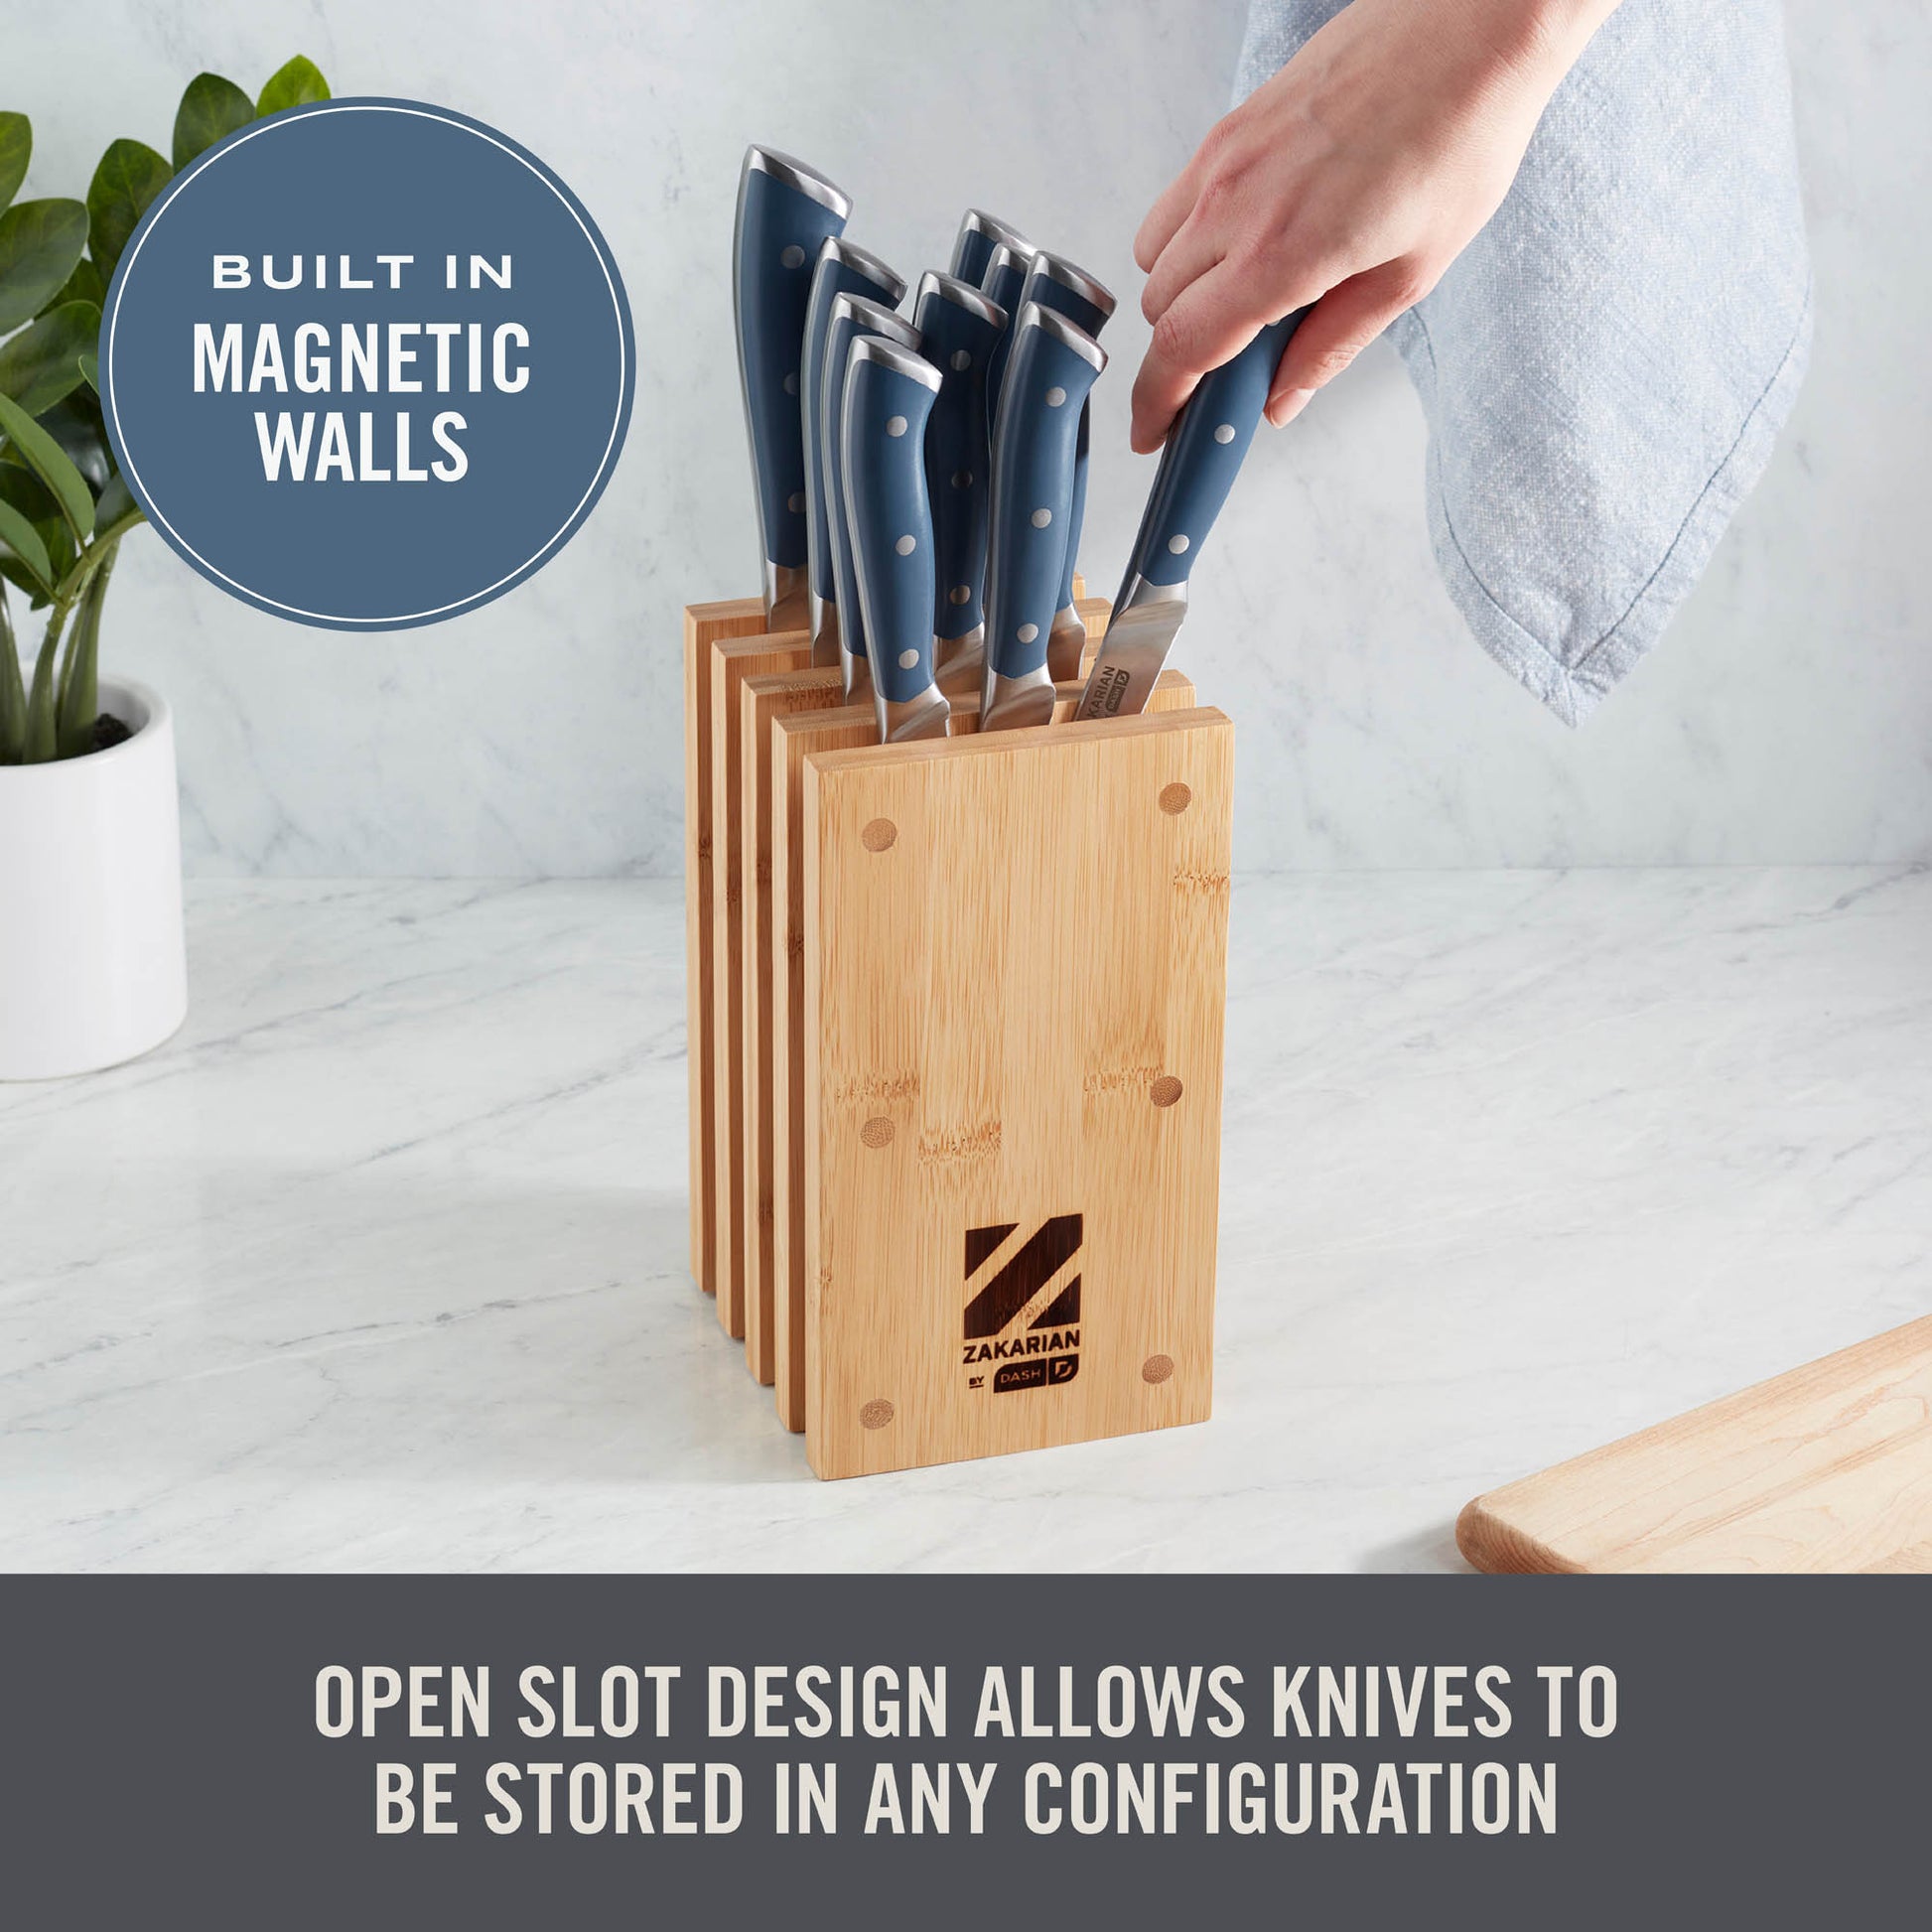 Zakarian by Dash Magnetic Knife Block Tools and Gadgets Zakarian by Dash   